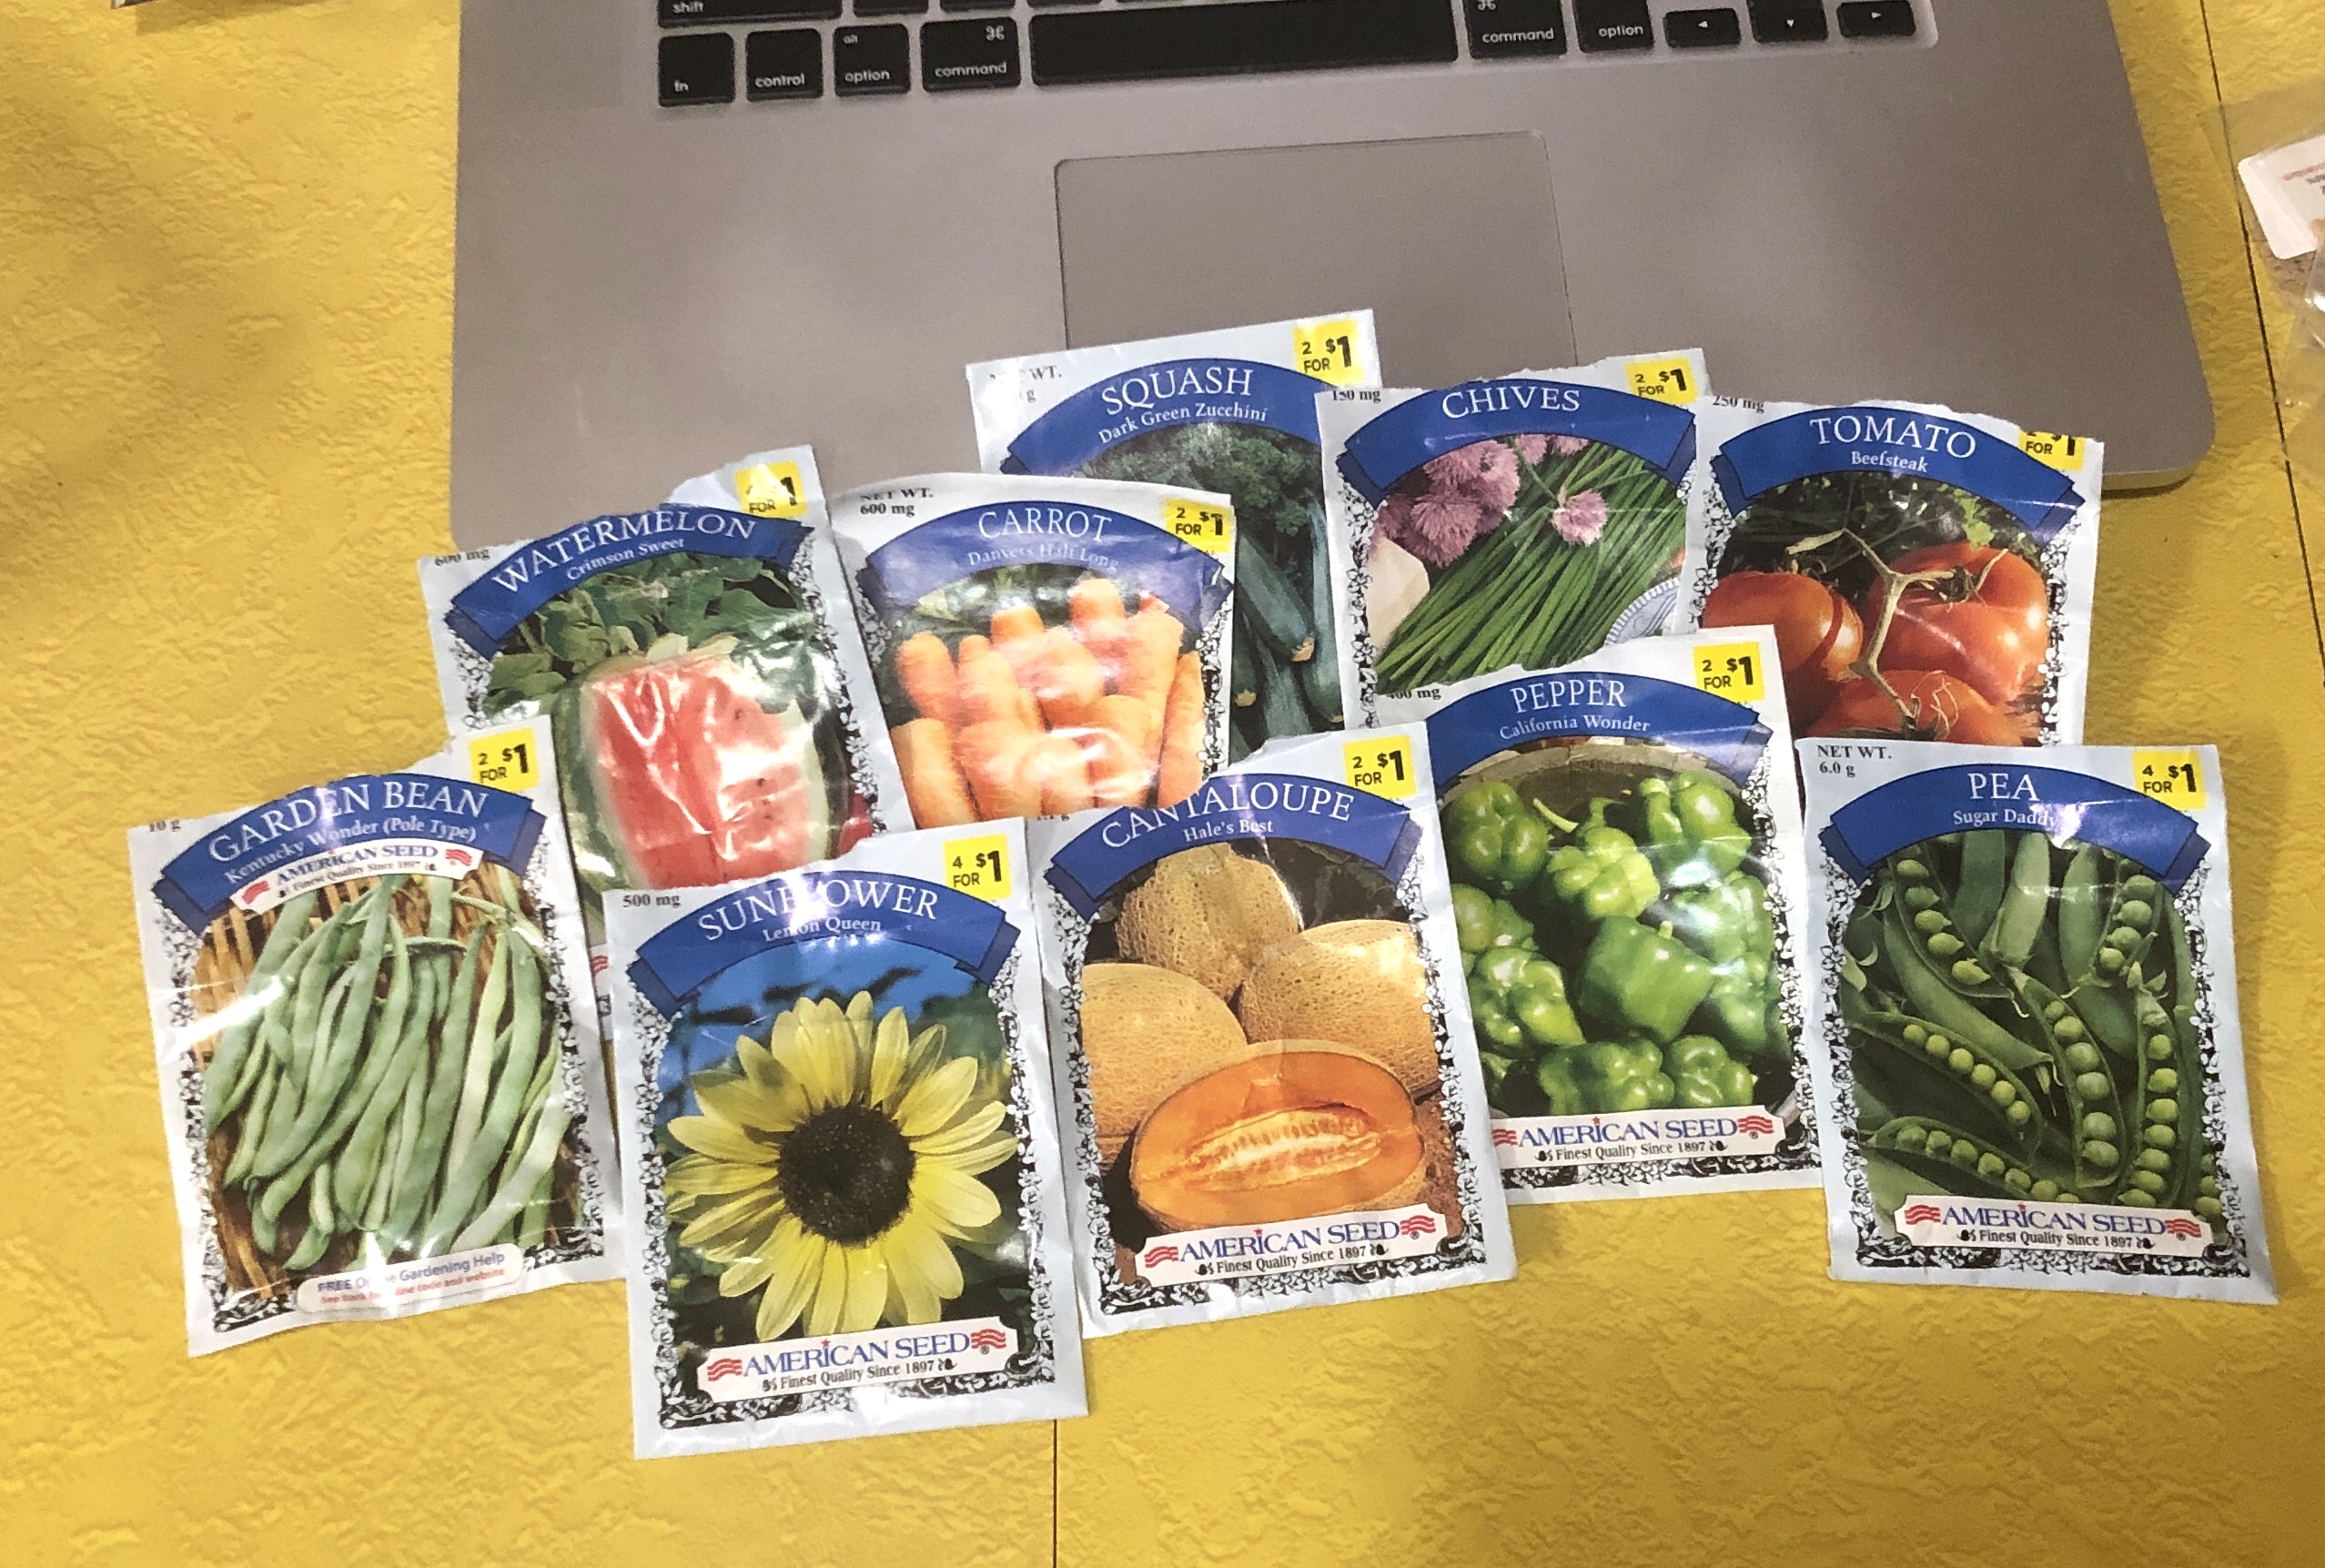 American Seed brand seeds from Dollar General